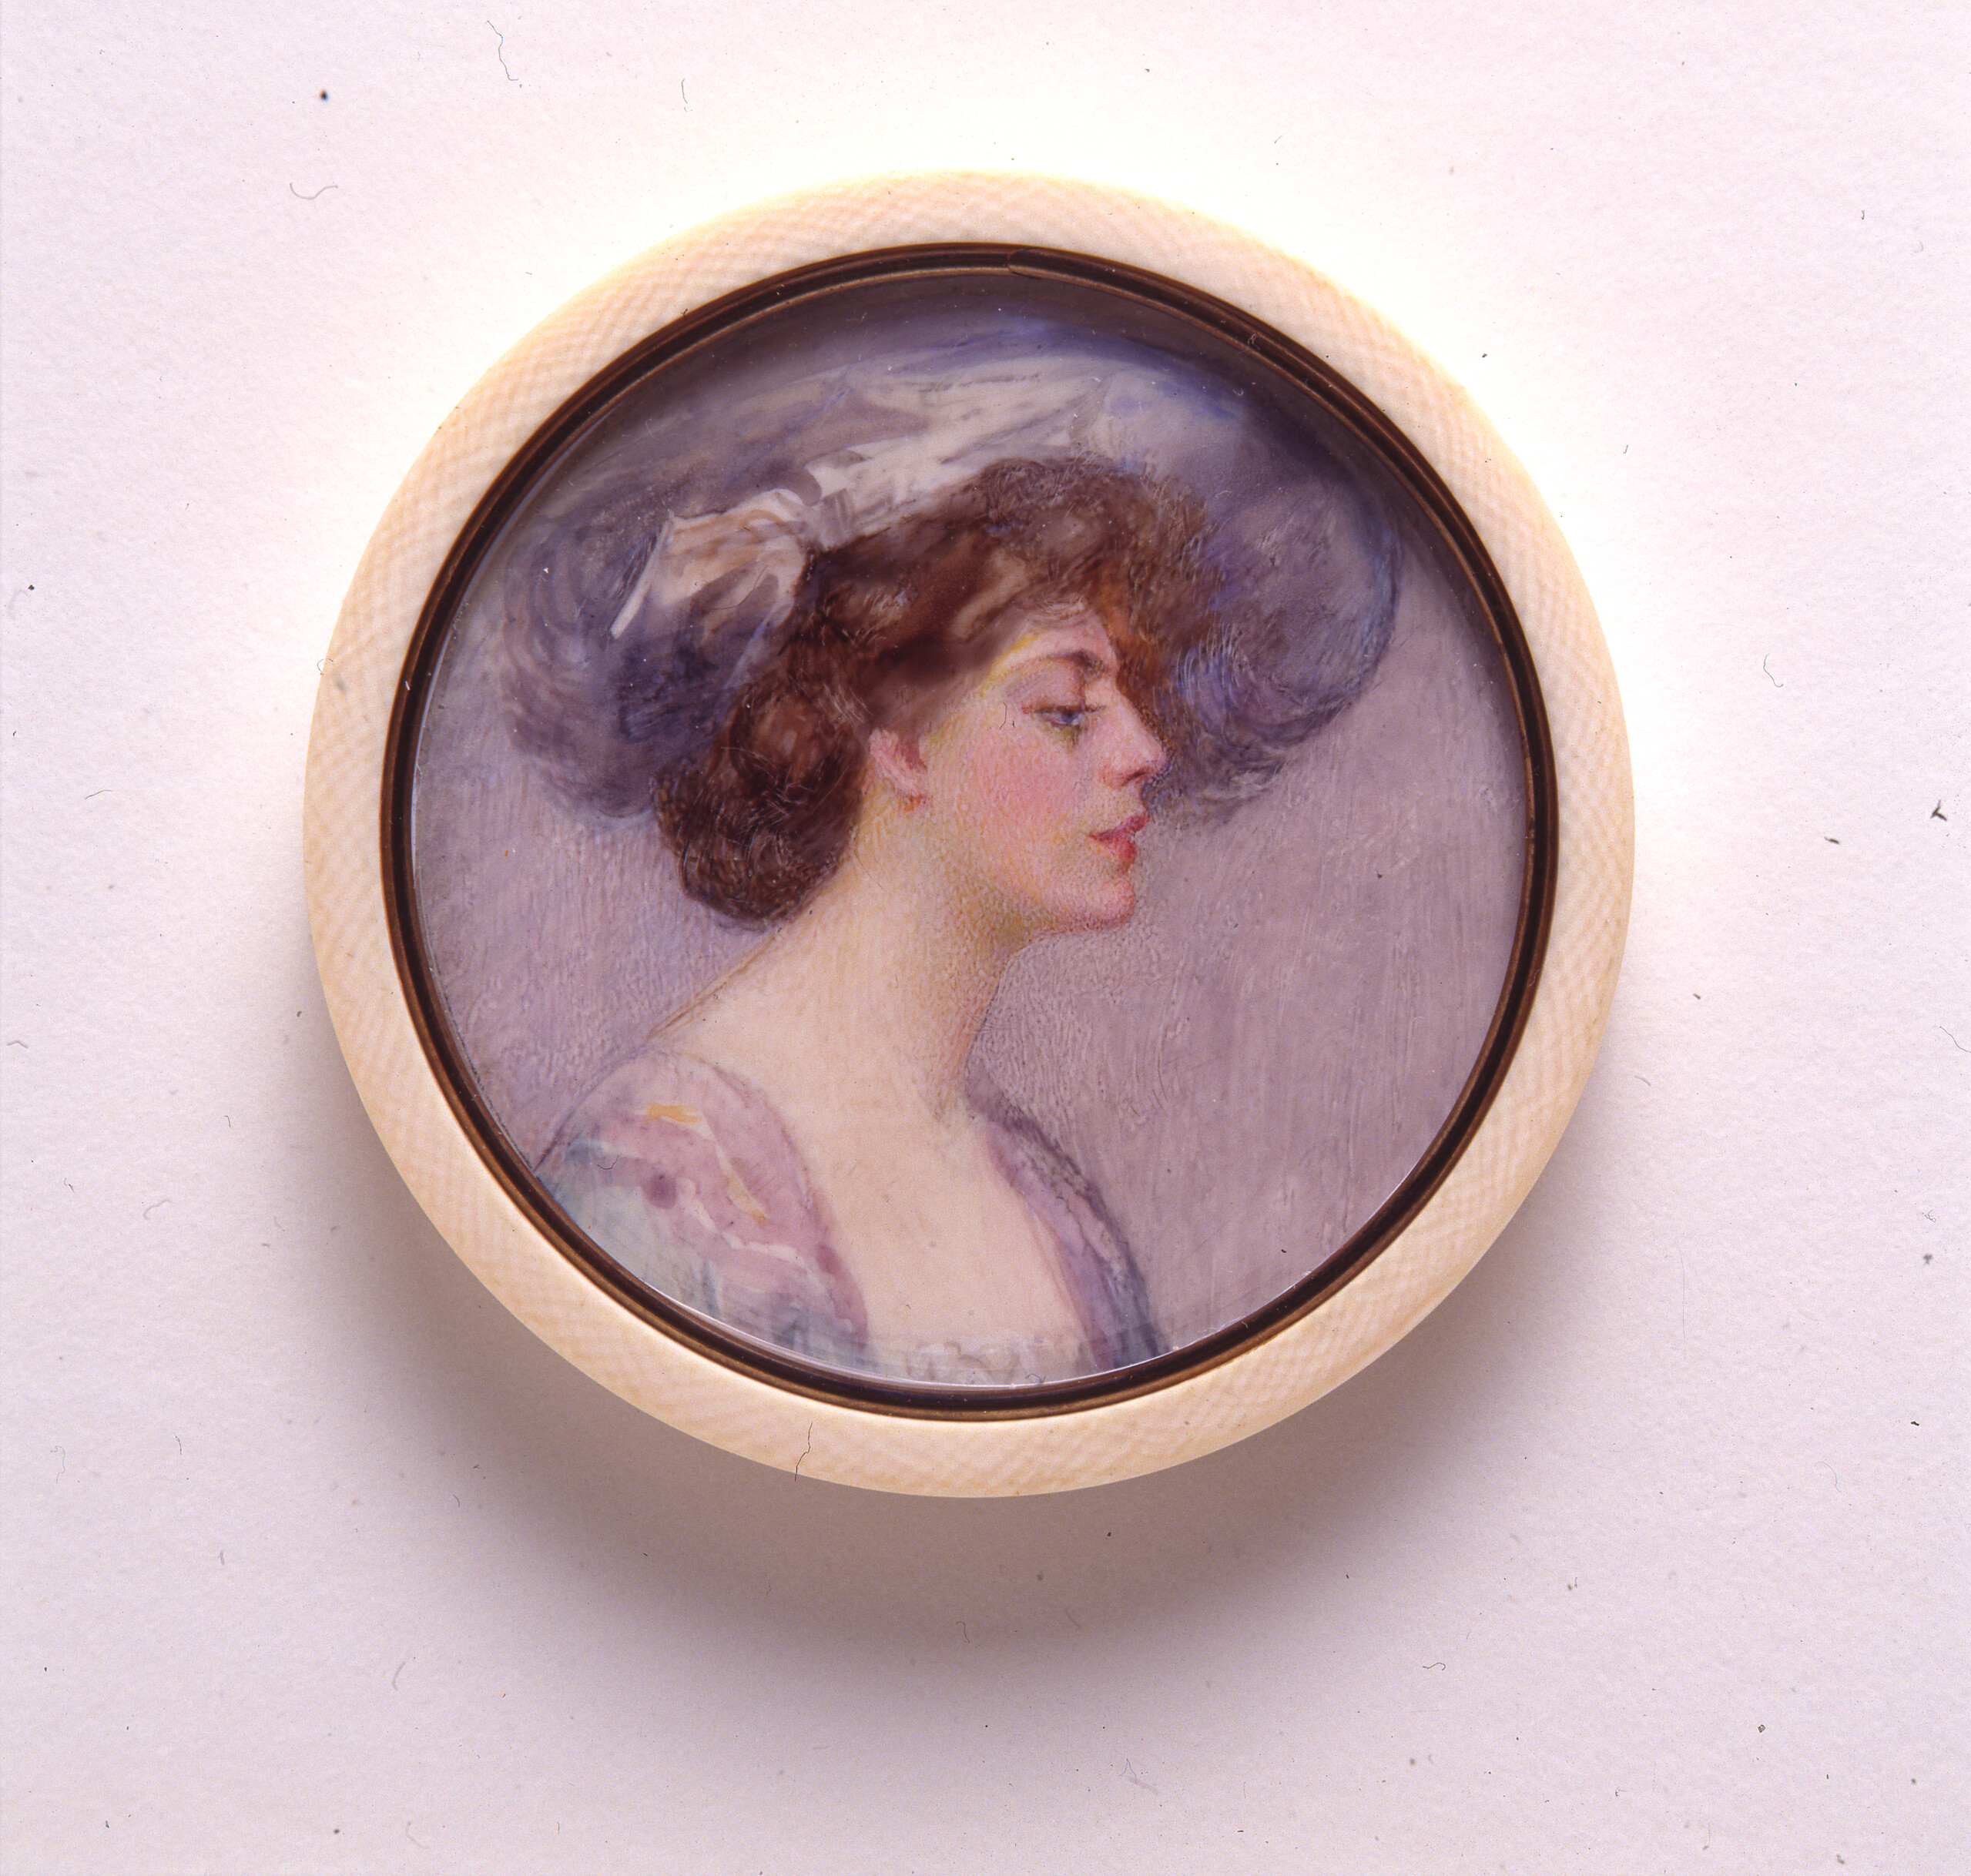 A miniature portrait in a round, white frame of a light-skinned adult woman in profile with brown hair pulled back in a loose bun. She wears a large, periwinkle hat that matches the sleeves of her purple and blue dress. The background of the portrait is pale purple.